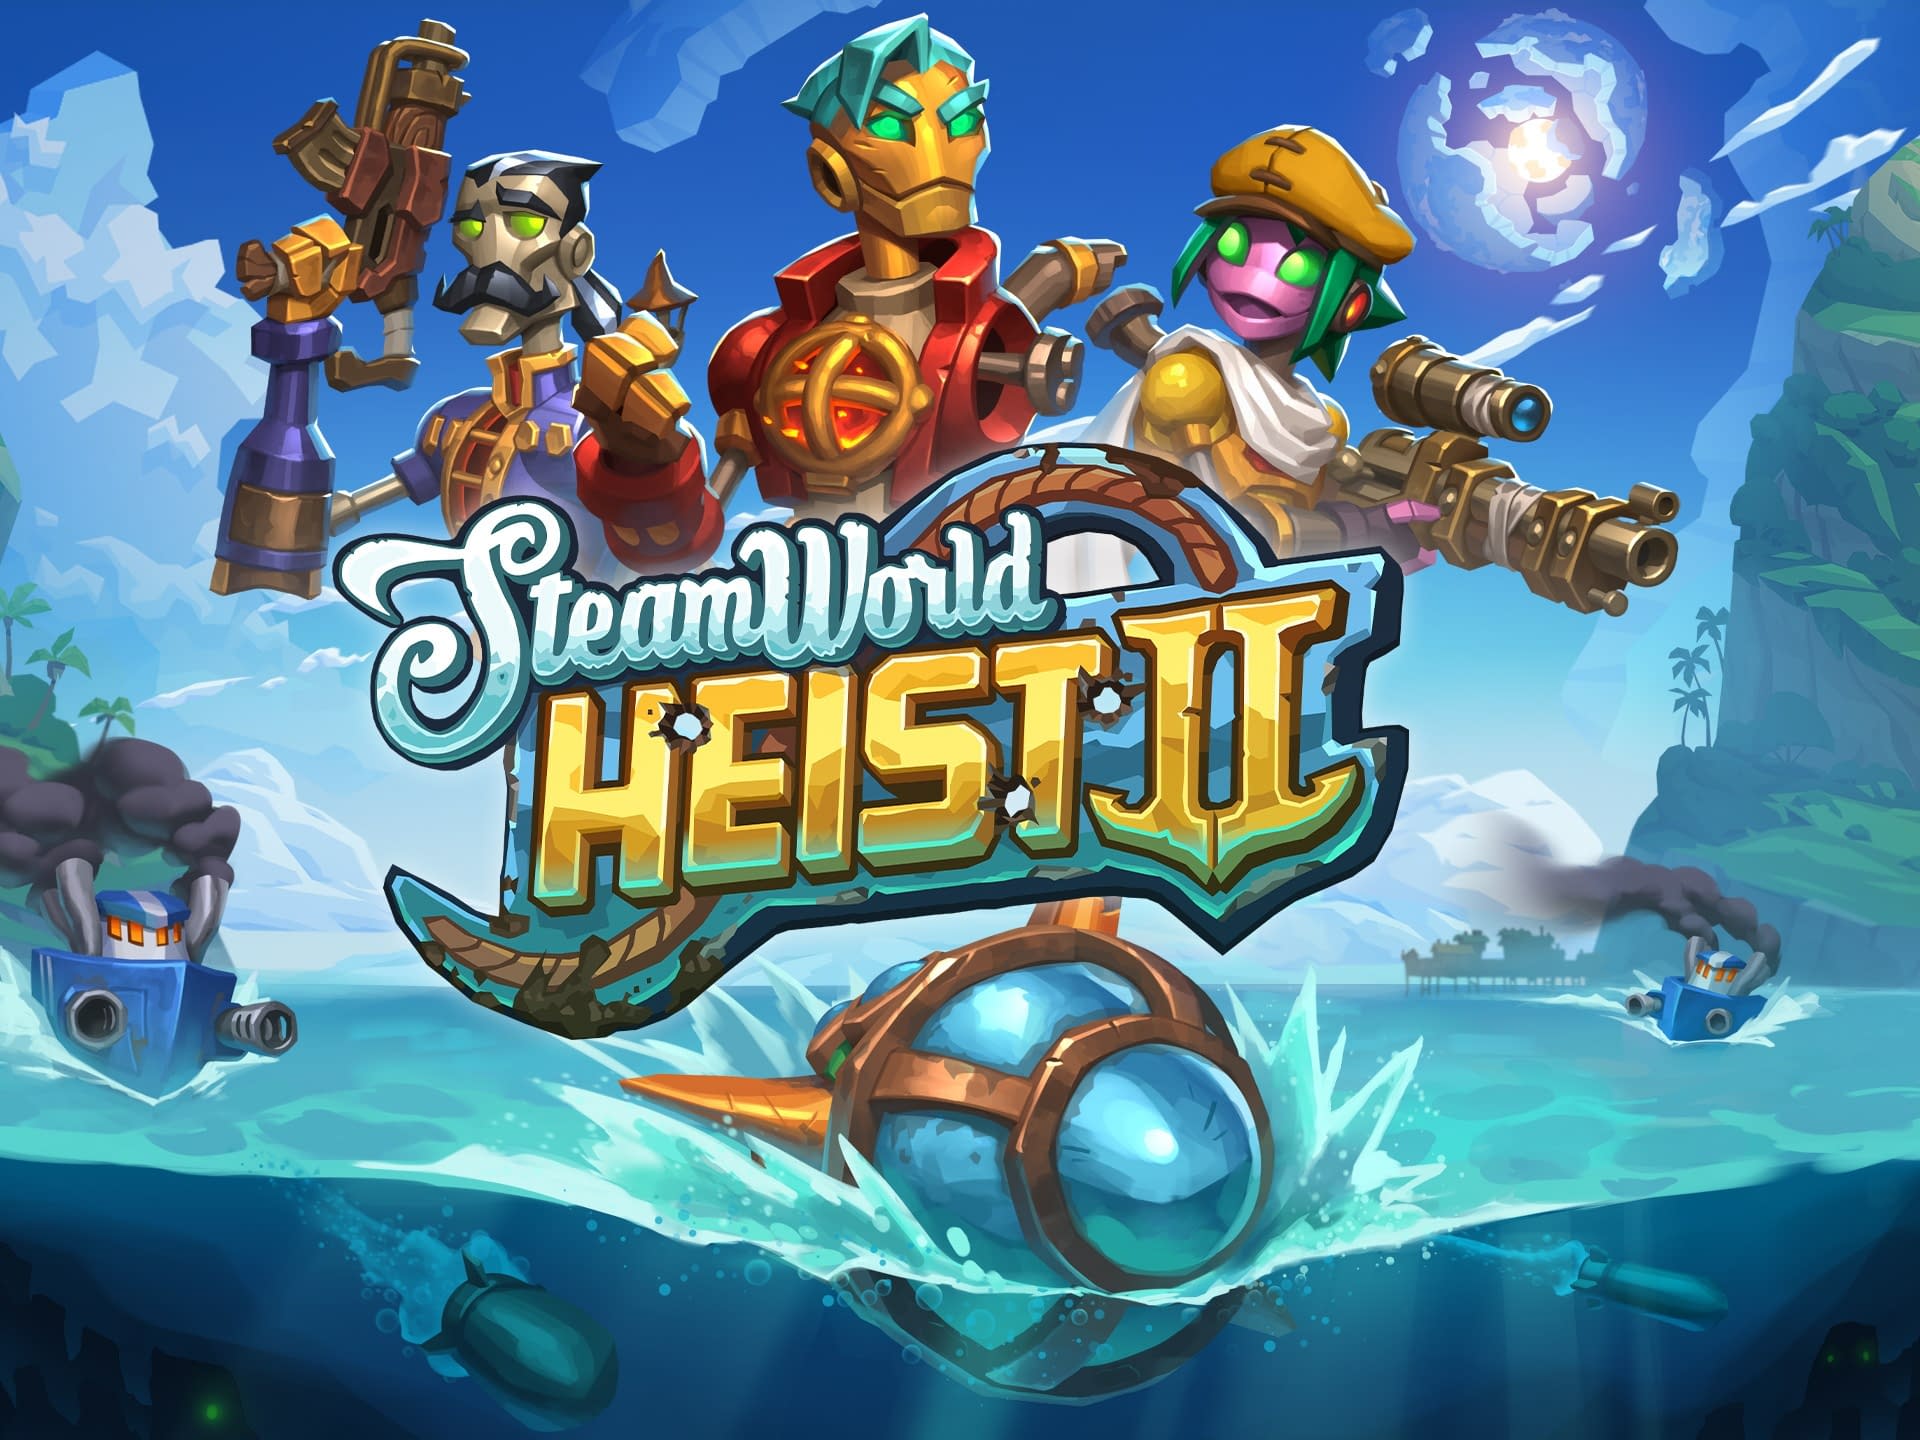 New Screen Images Published For Steamworld Heist 2